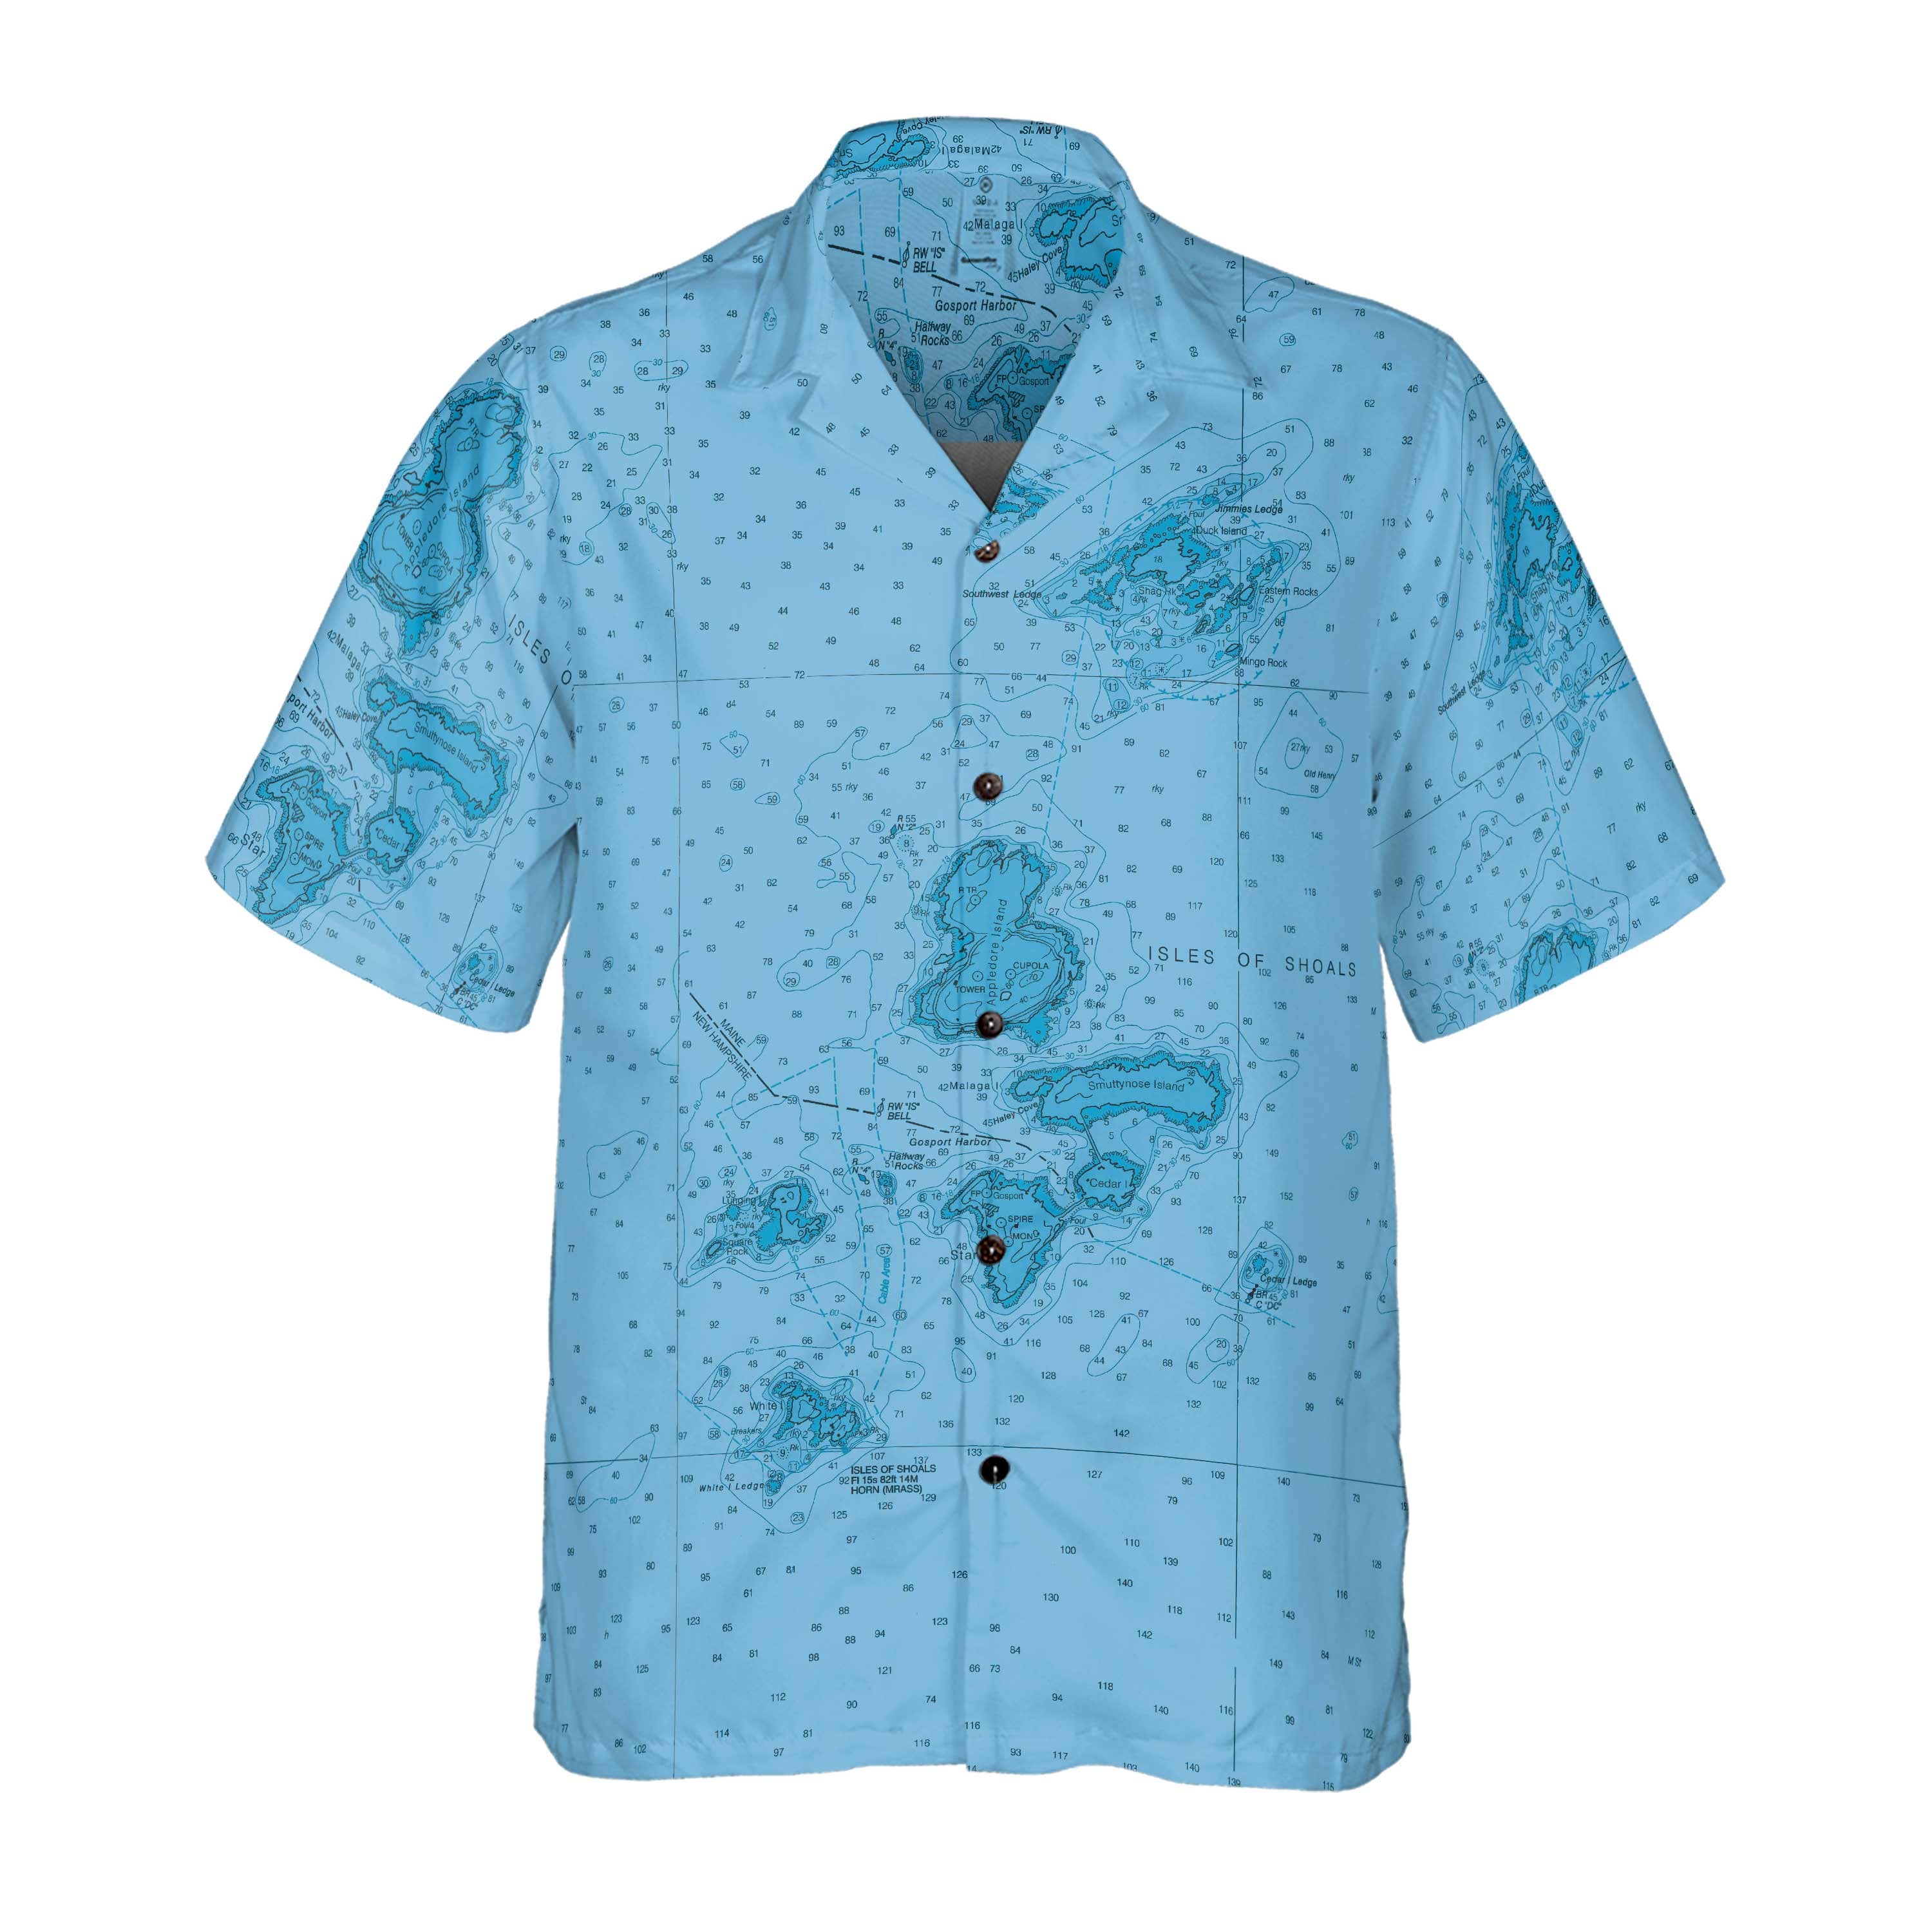 The Isles of Shoals Blue Mariner Coconut Button Camp Shirt